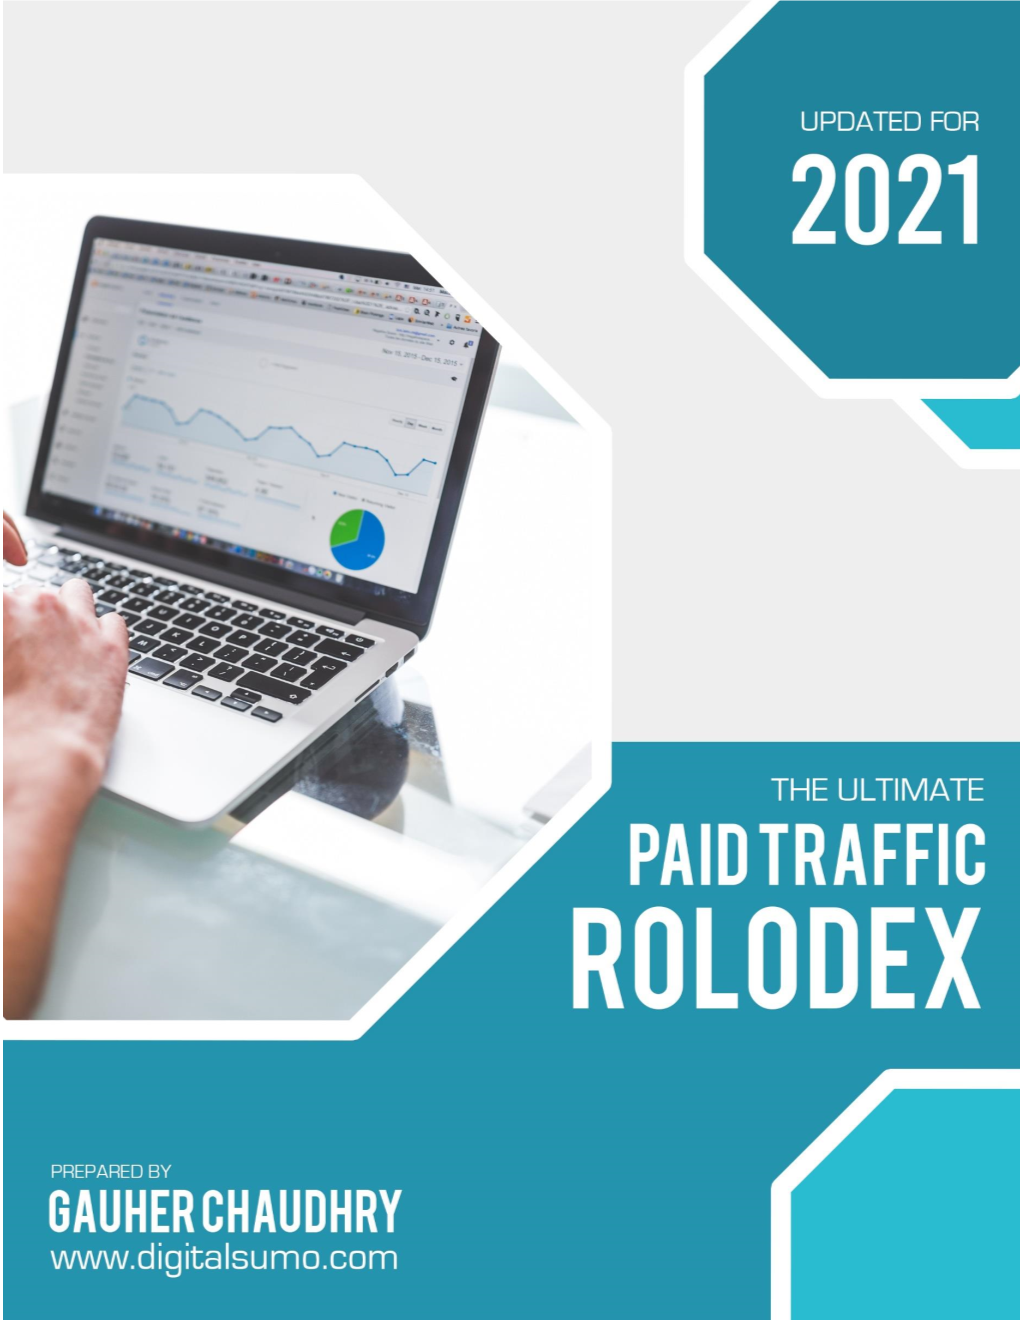 The Ultimate Paid Traffic Rolodex |